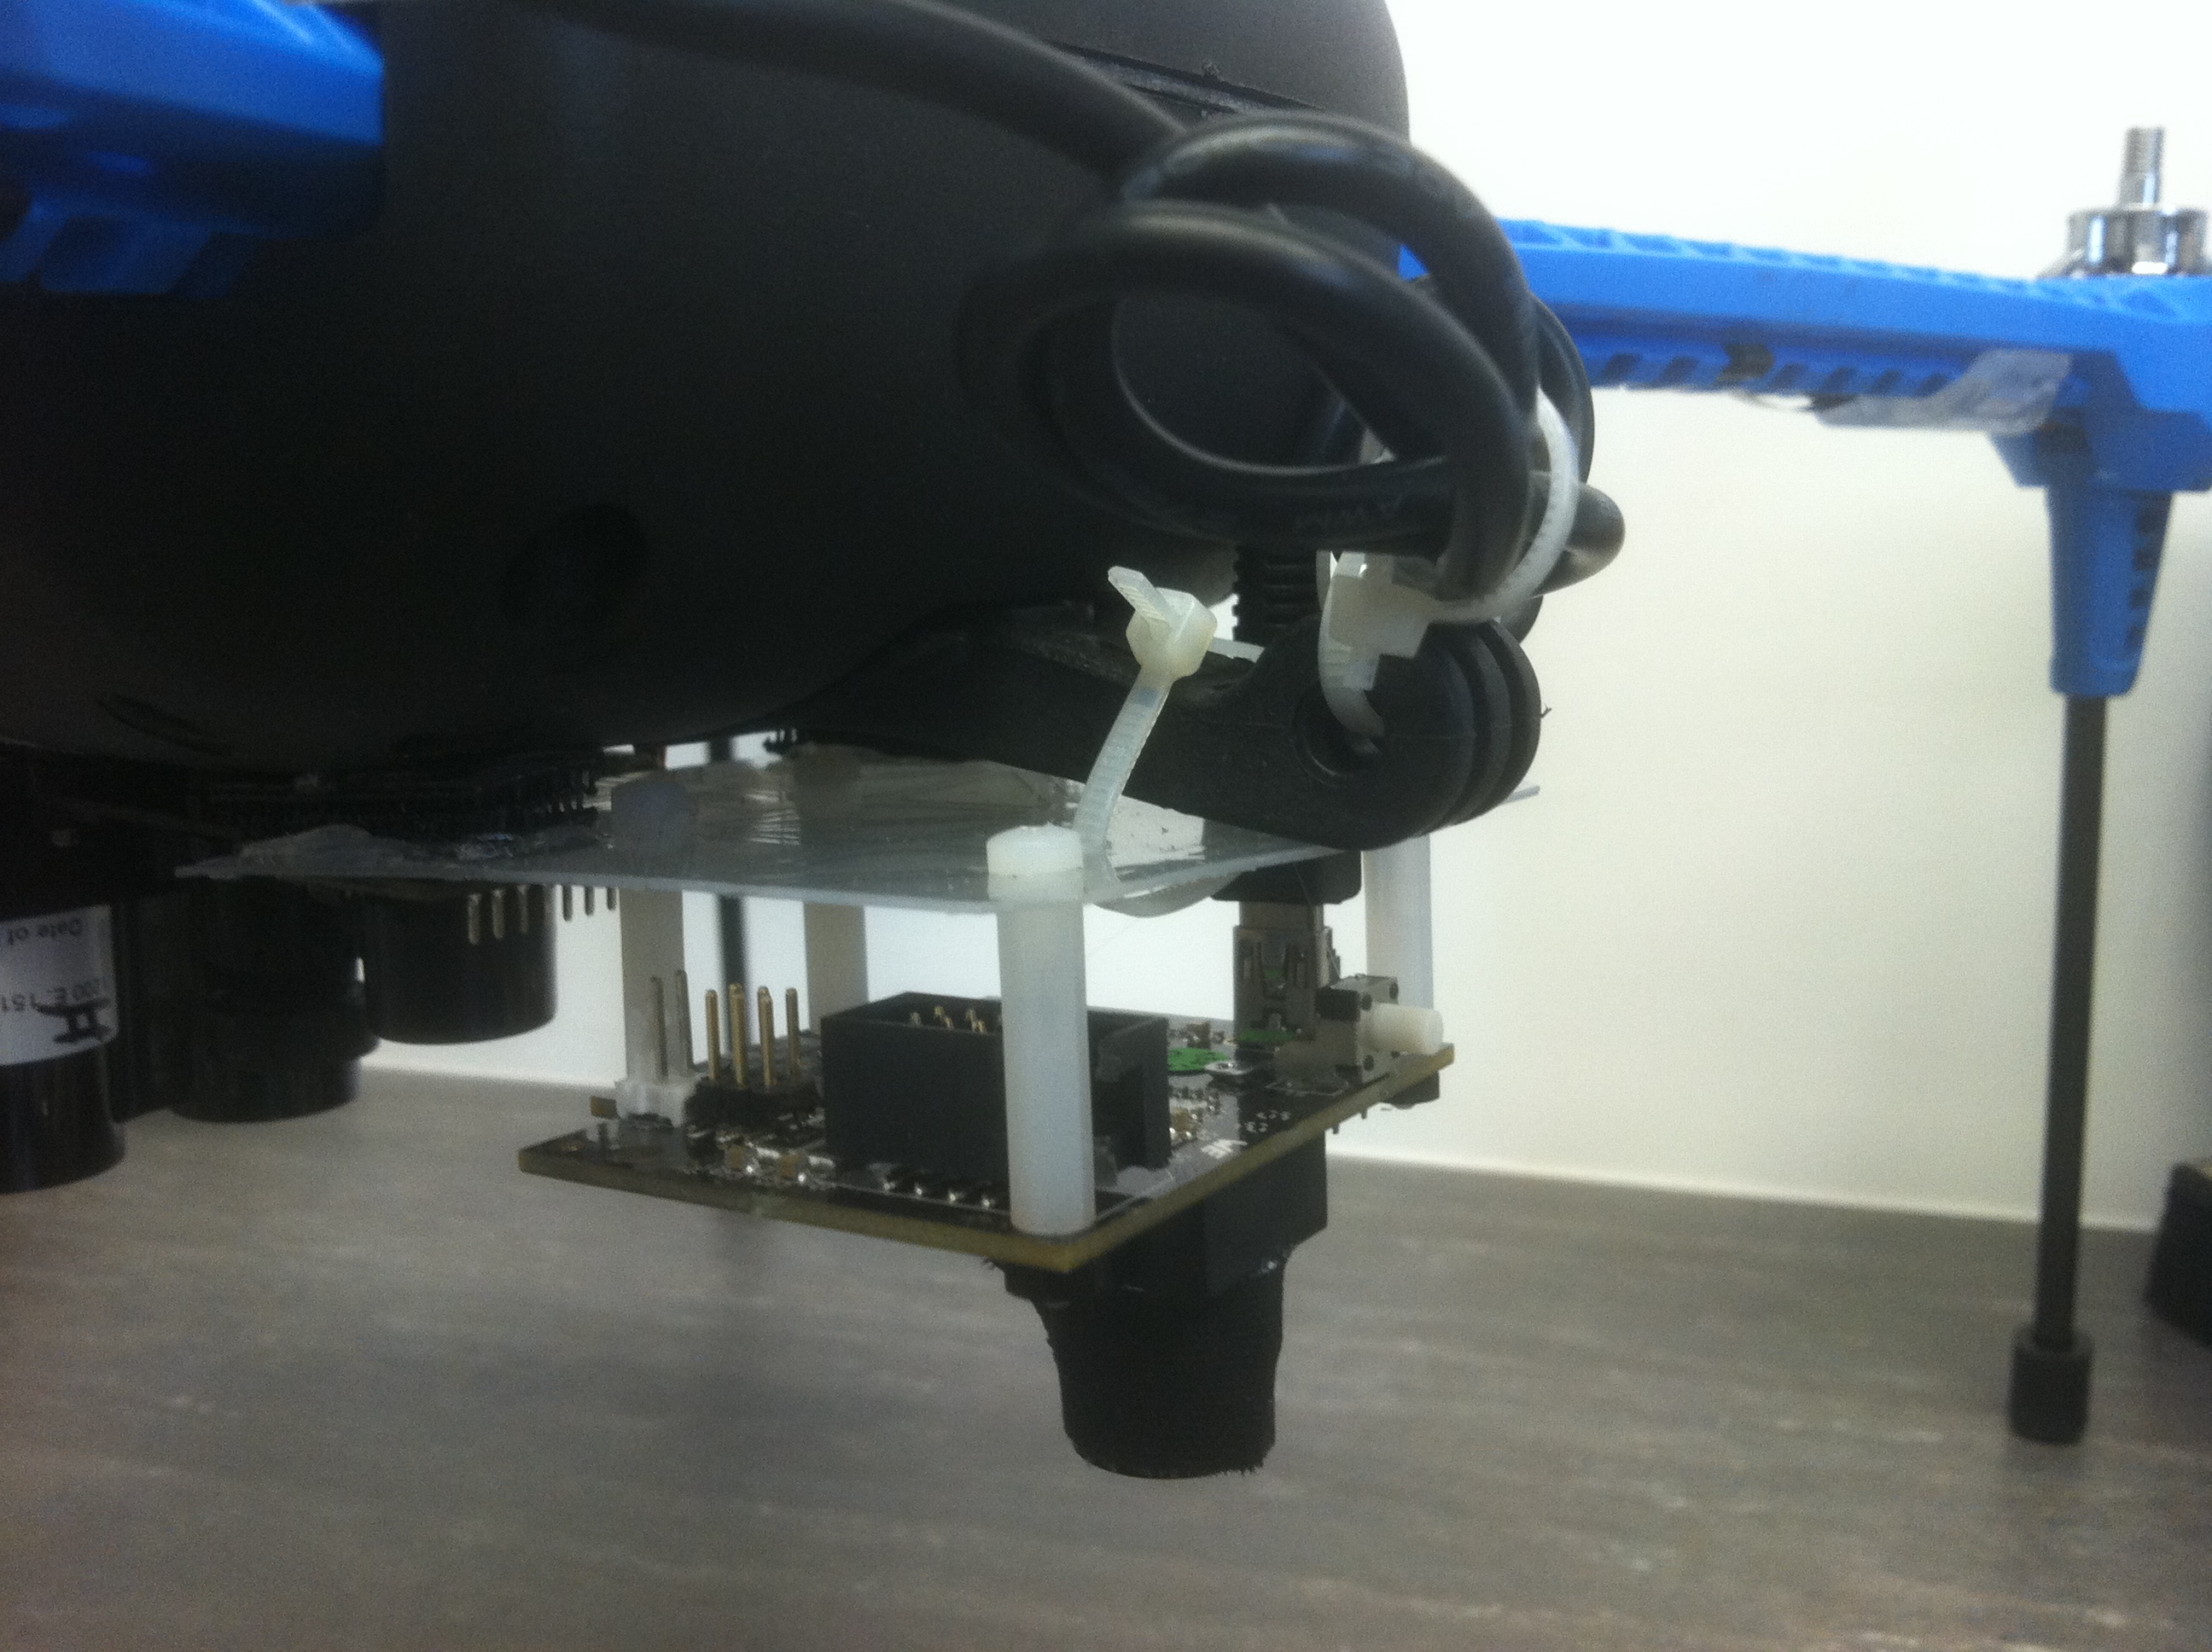 Pixy cam mounting: side view